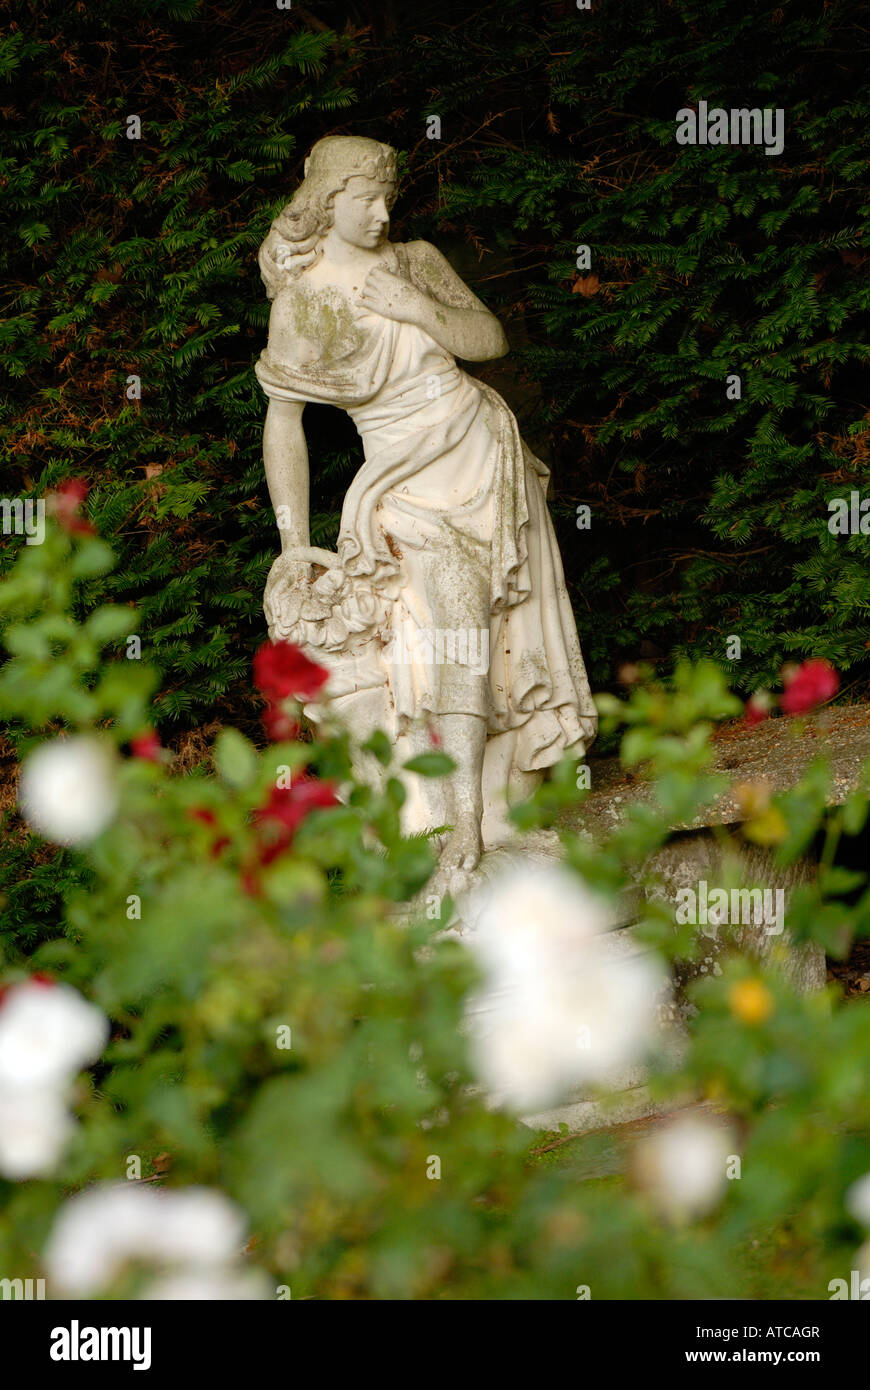 a neo classical greek roman garden statue set amongst white and red roses in a landscaped manor garden grounds Stock Photo